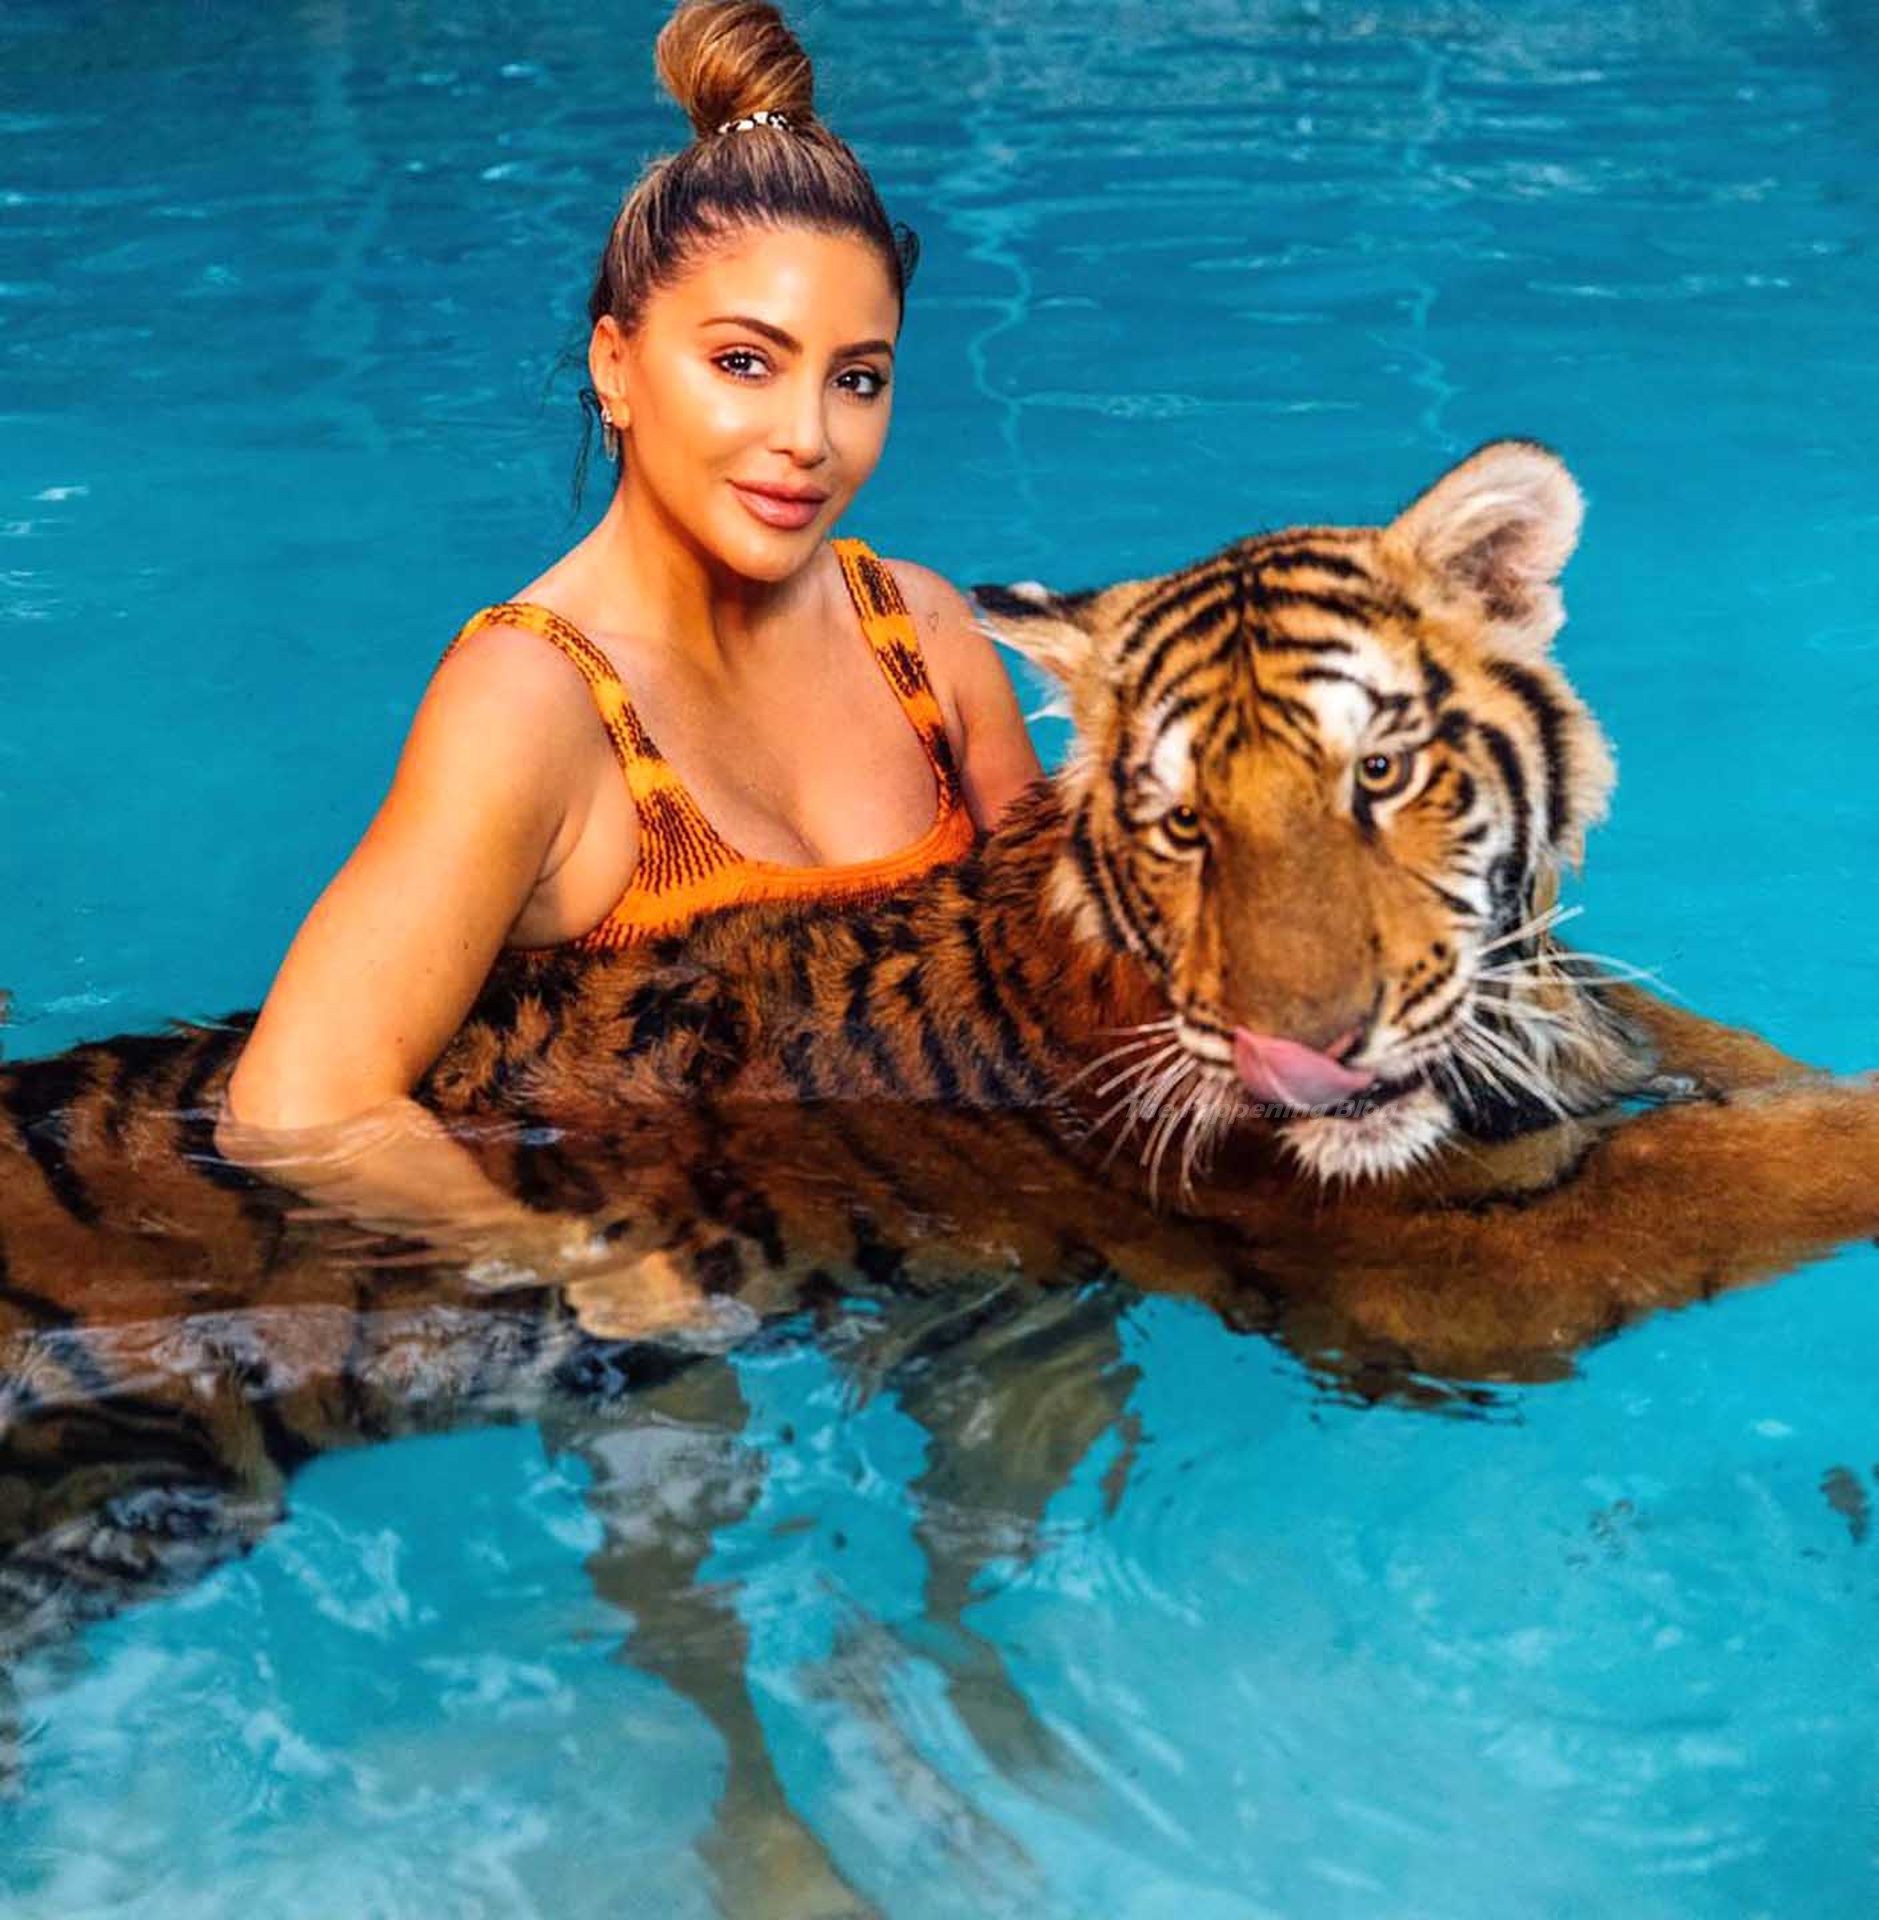 Larsa Pippen Gets Into a Swimming Pool with a Giant Tiger (2 Photos)